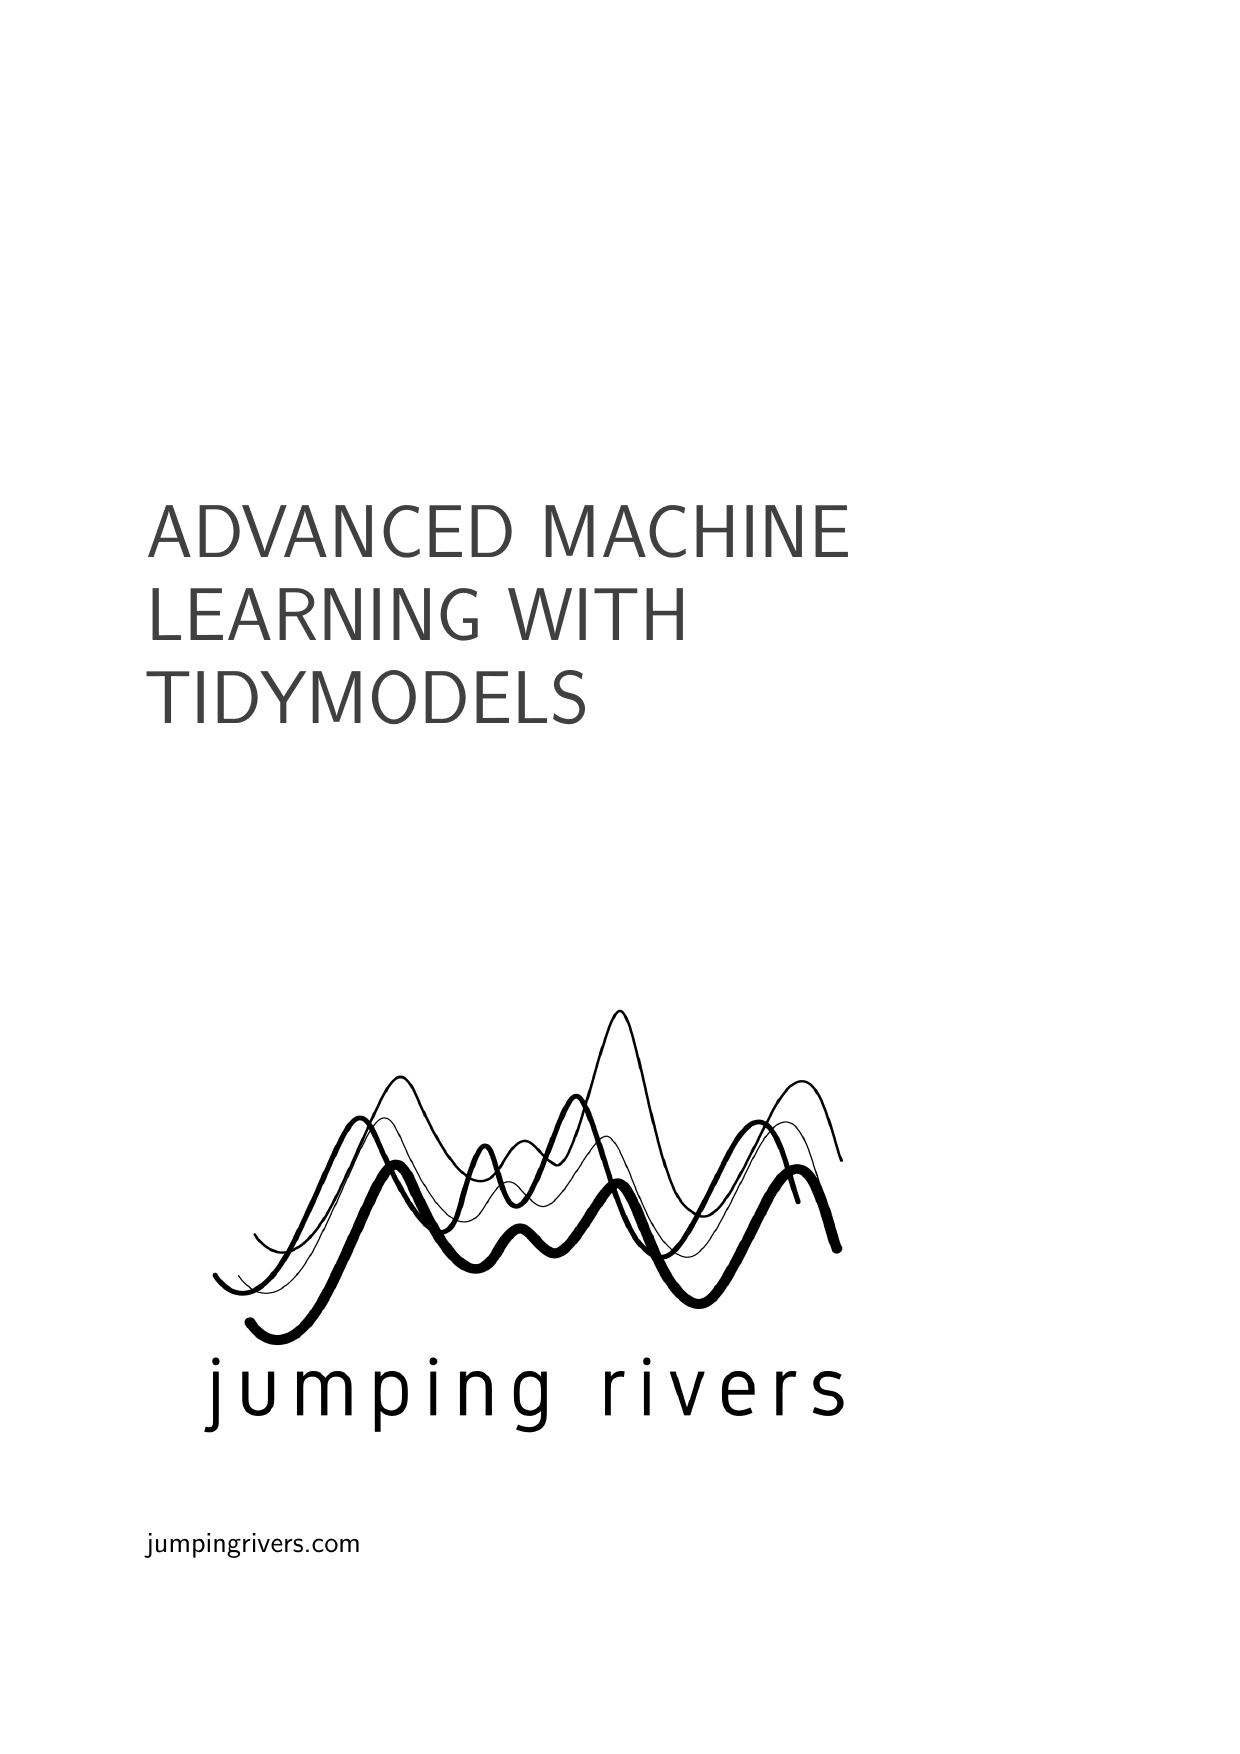 Example course material for 'Advanced Machine Learning with Tidymodels